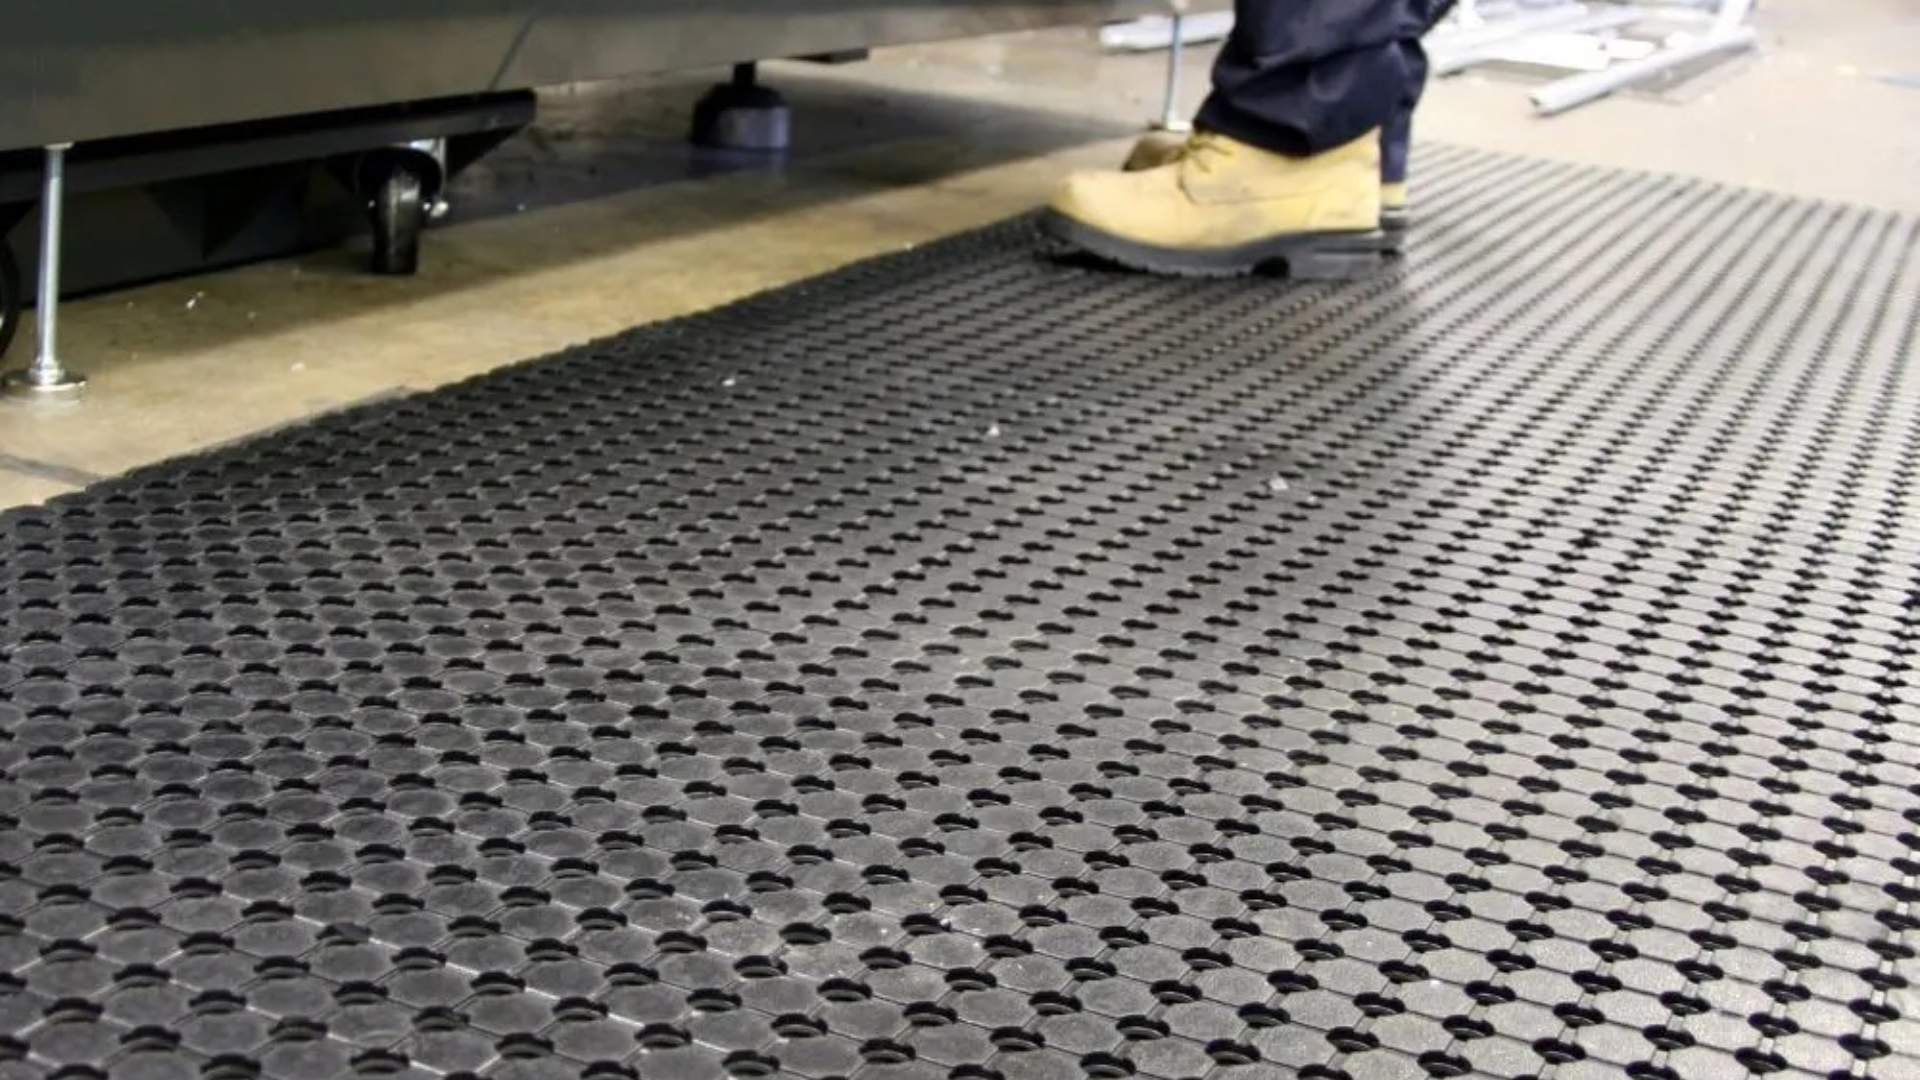  M+A Matting Comfort Flow  Commercial-Grade Drainable  Anti-Fatigue Mat for Wet Areas, Slip Resistant, Chemical Resistant, Welding  Safe, Grease and Oil Proof, (Black, 4' x 6') : Industrial & Scientific